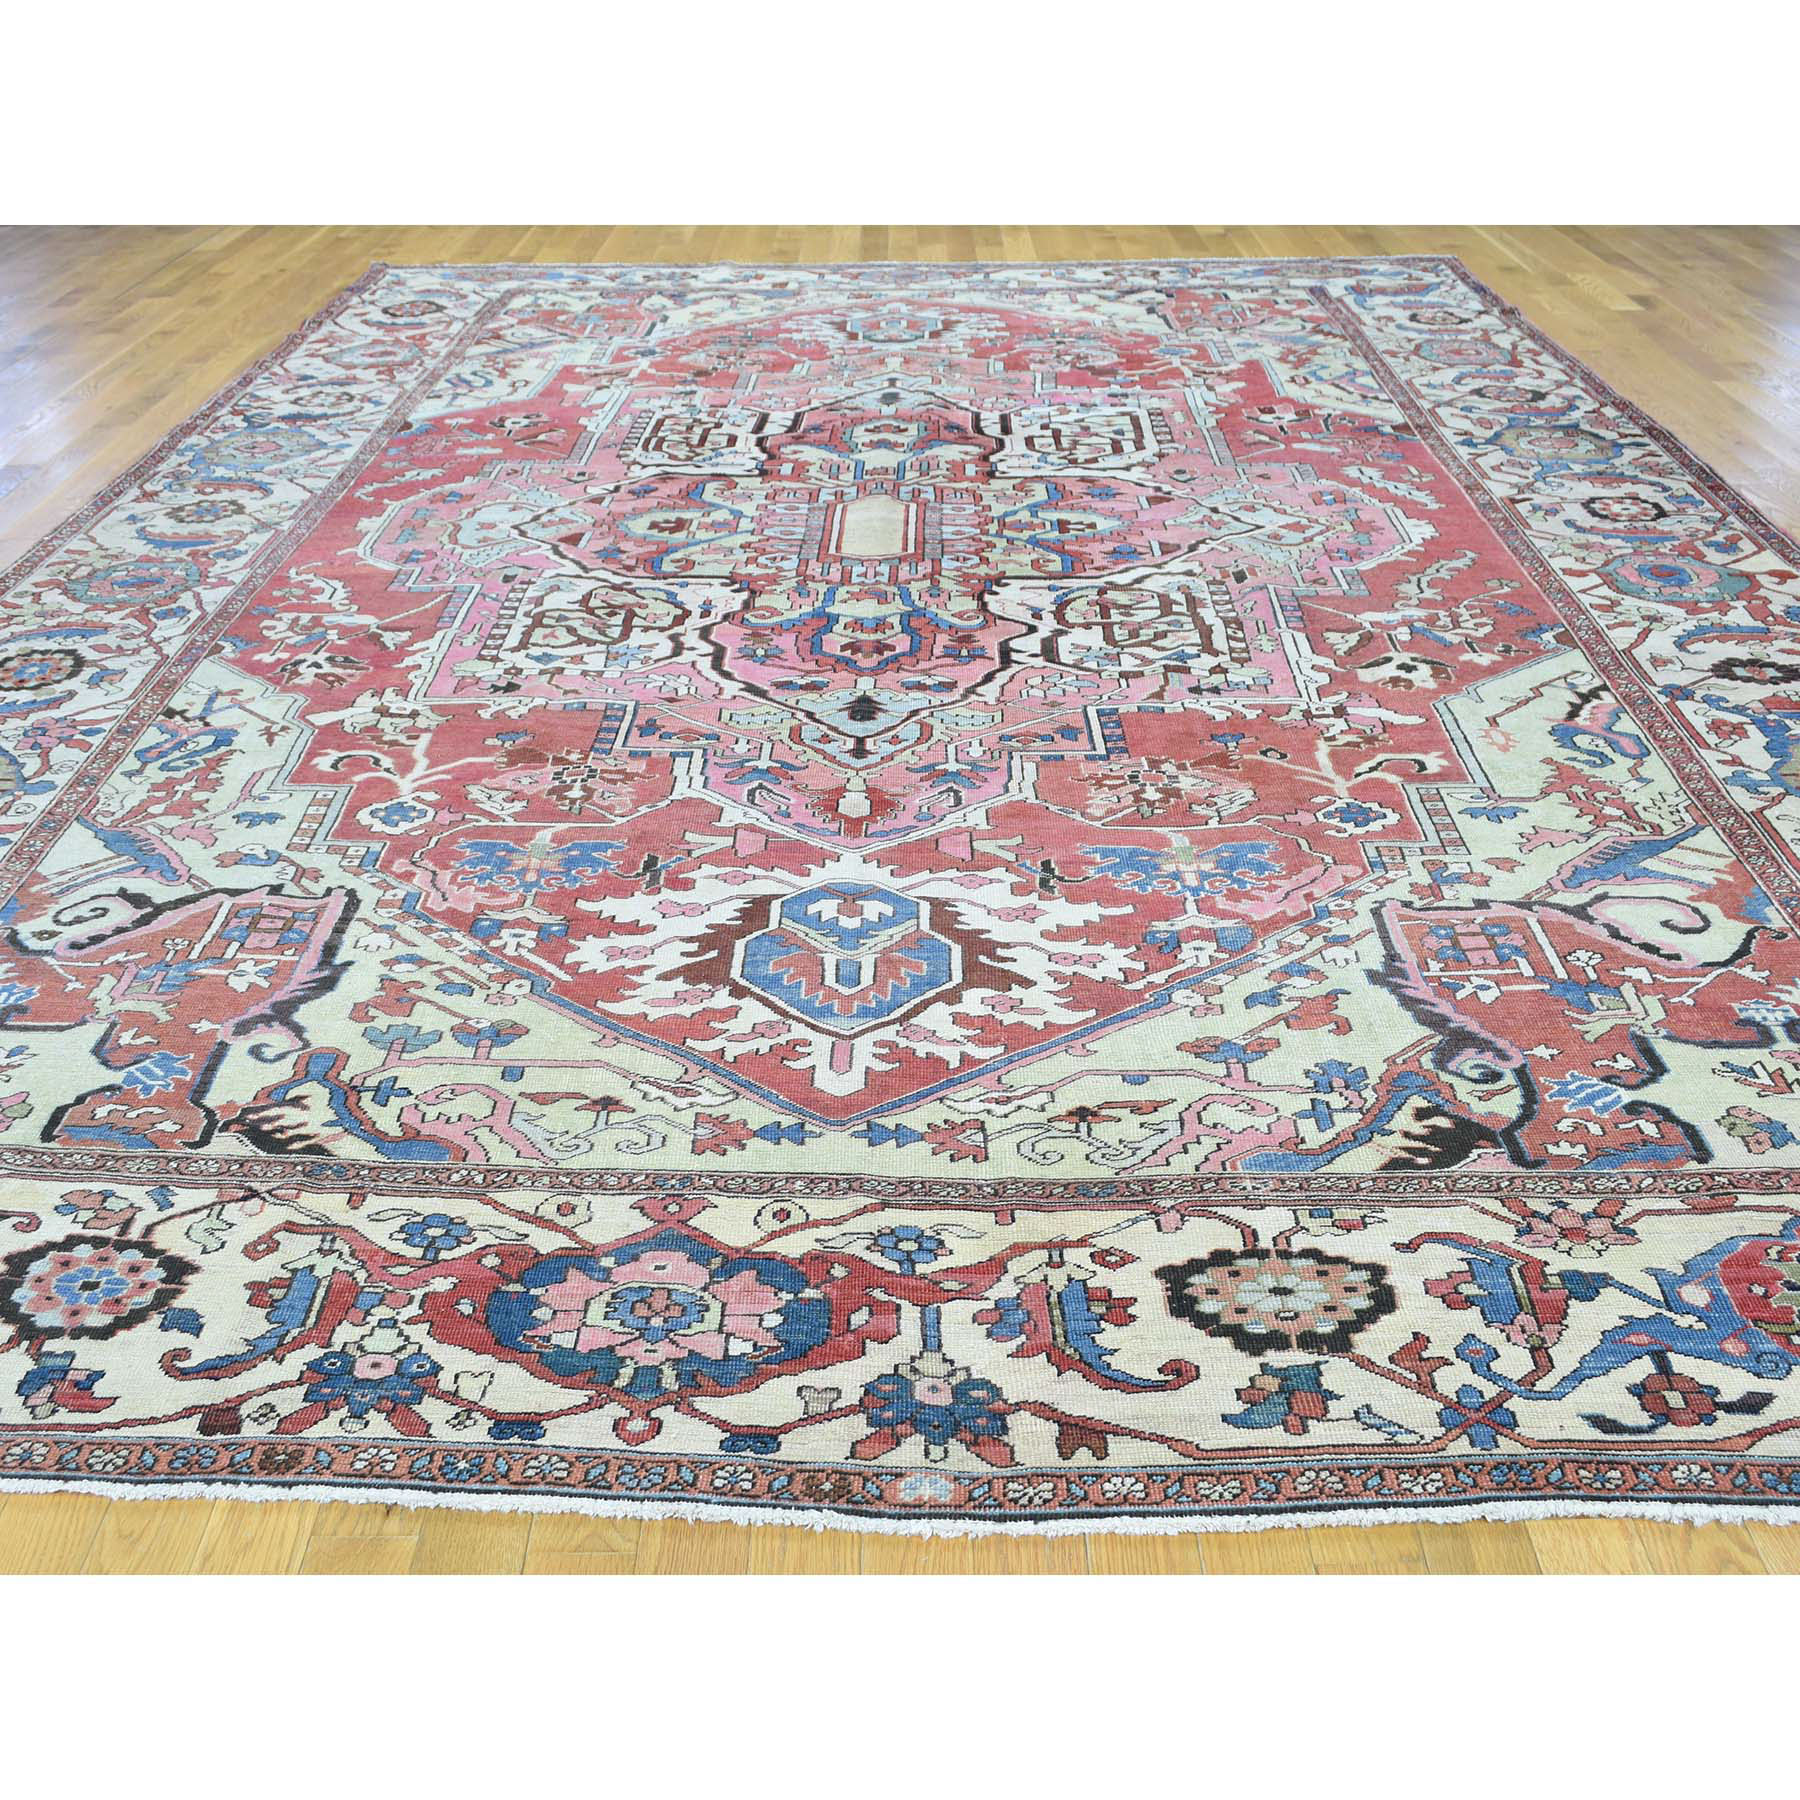 10-1 x14-1  Hand-Knotted Antique Persian Serapi Good Cond Oriental Rug 